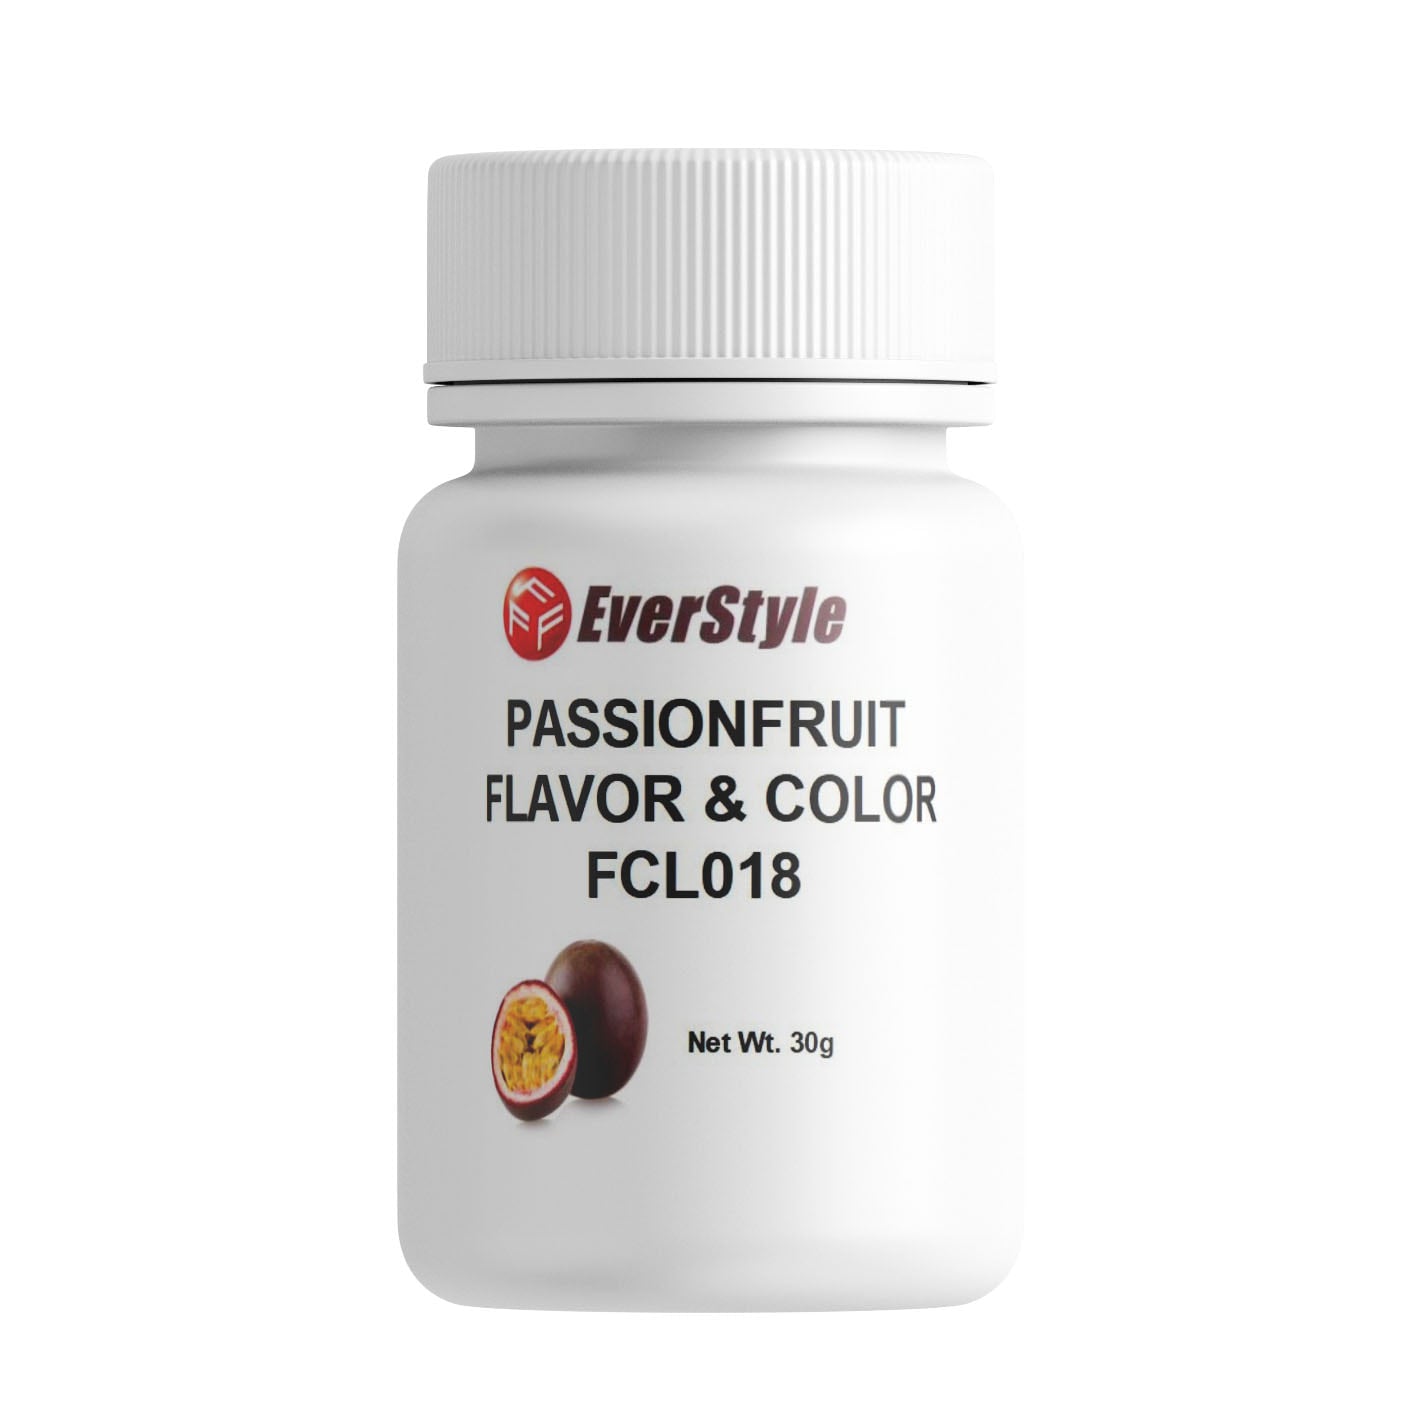 Everstyle Passionfruit Flavor and Color 30g (FCL018)